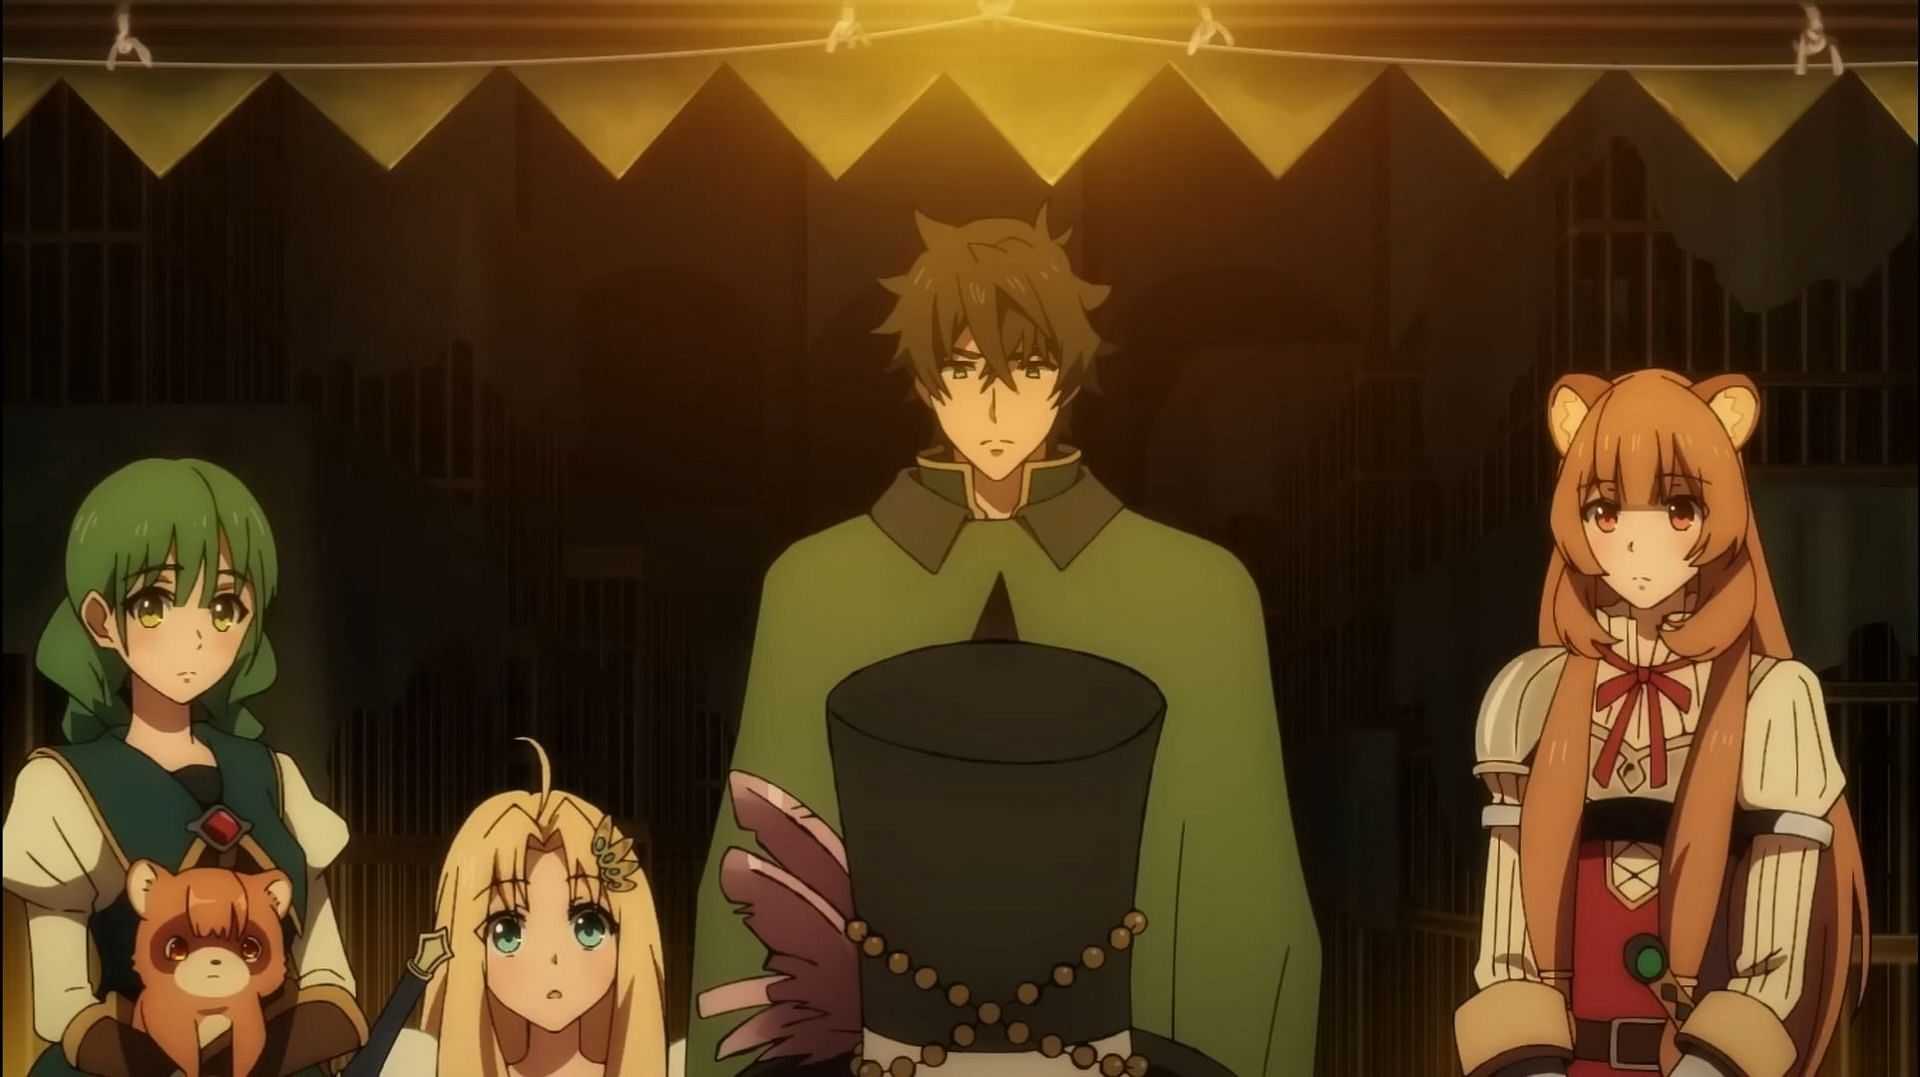 The Rising of the Shield Hero Season 3 Anime is Ready to Rise This